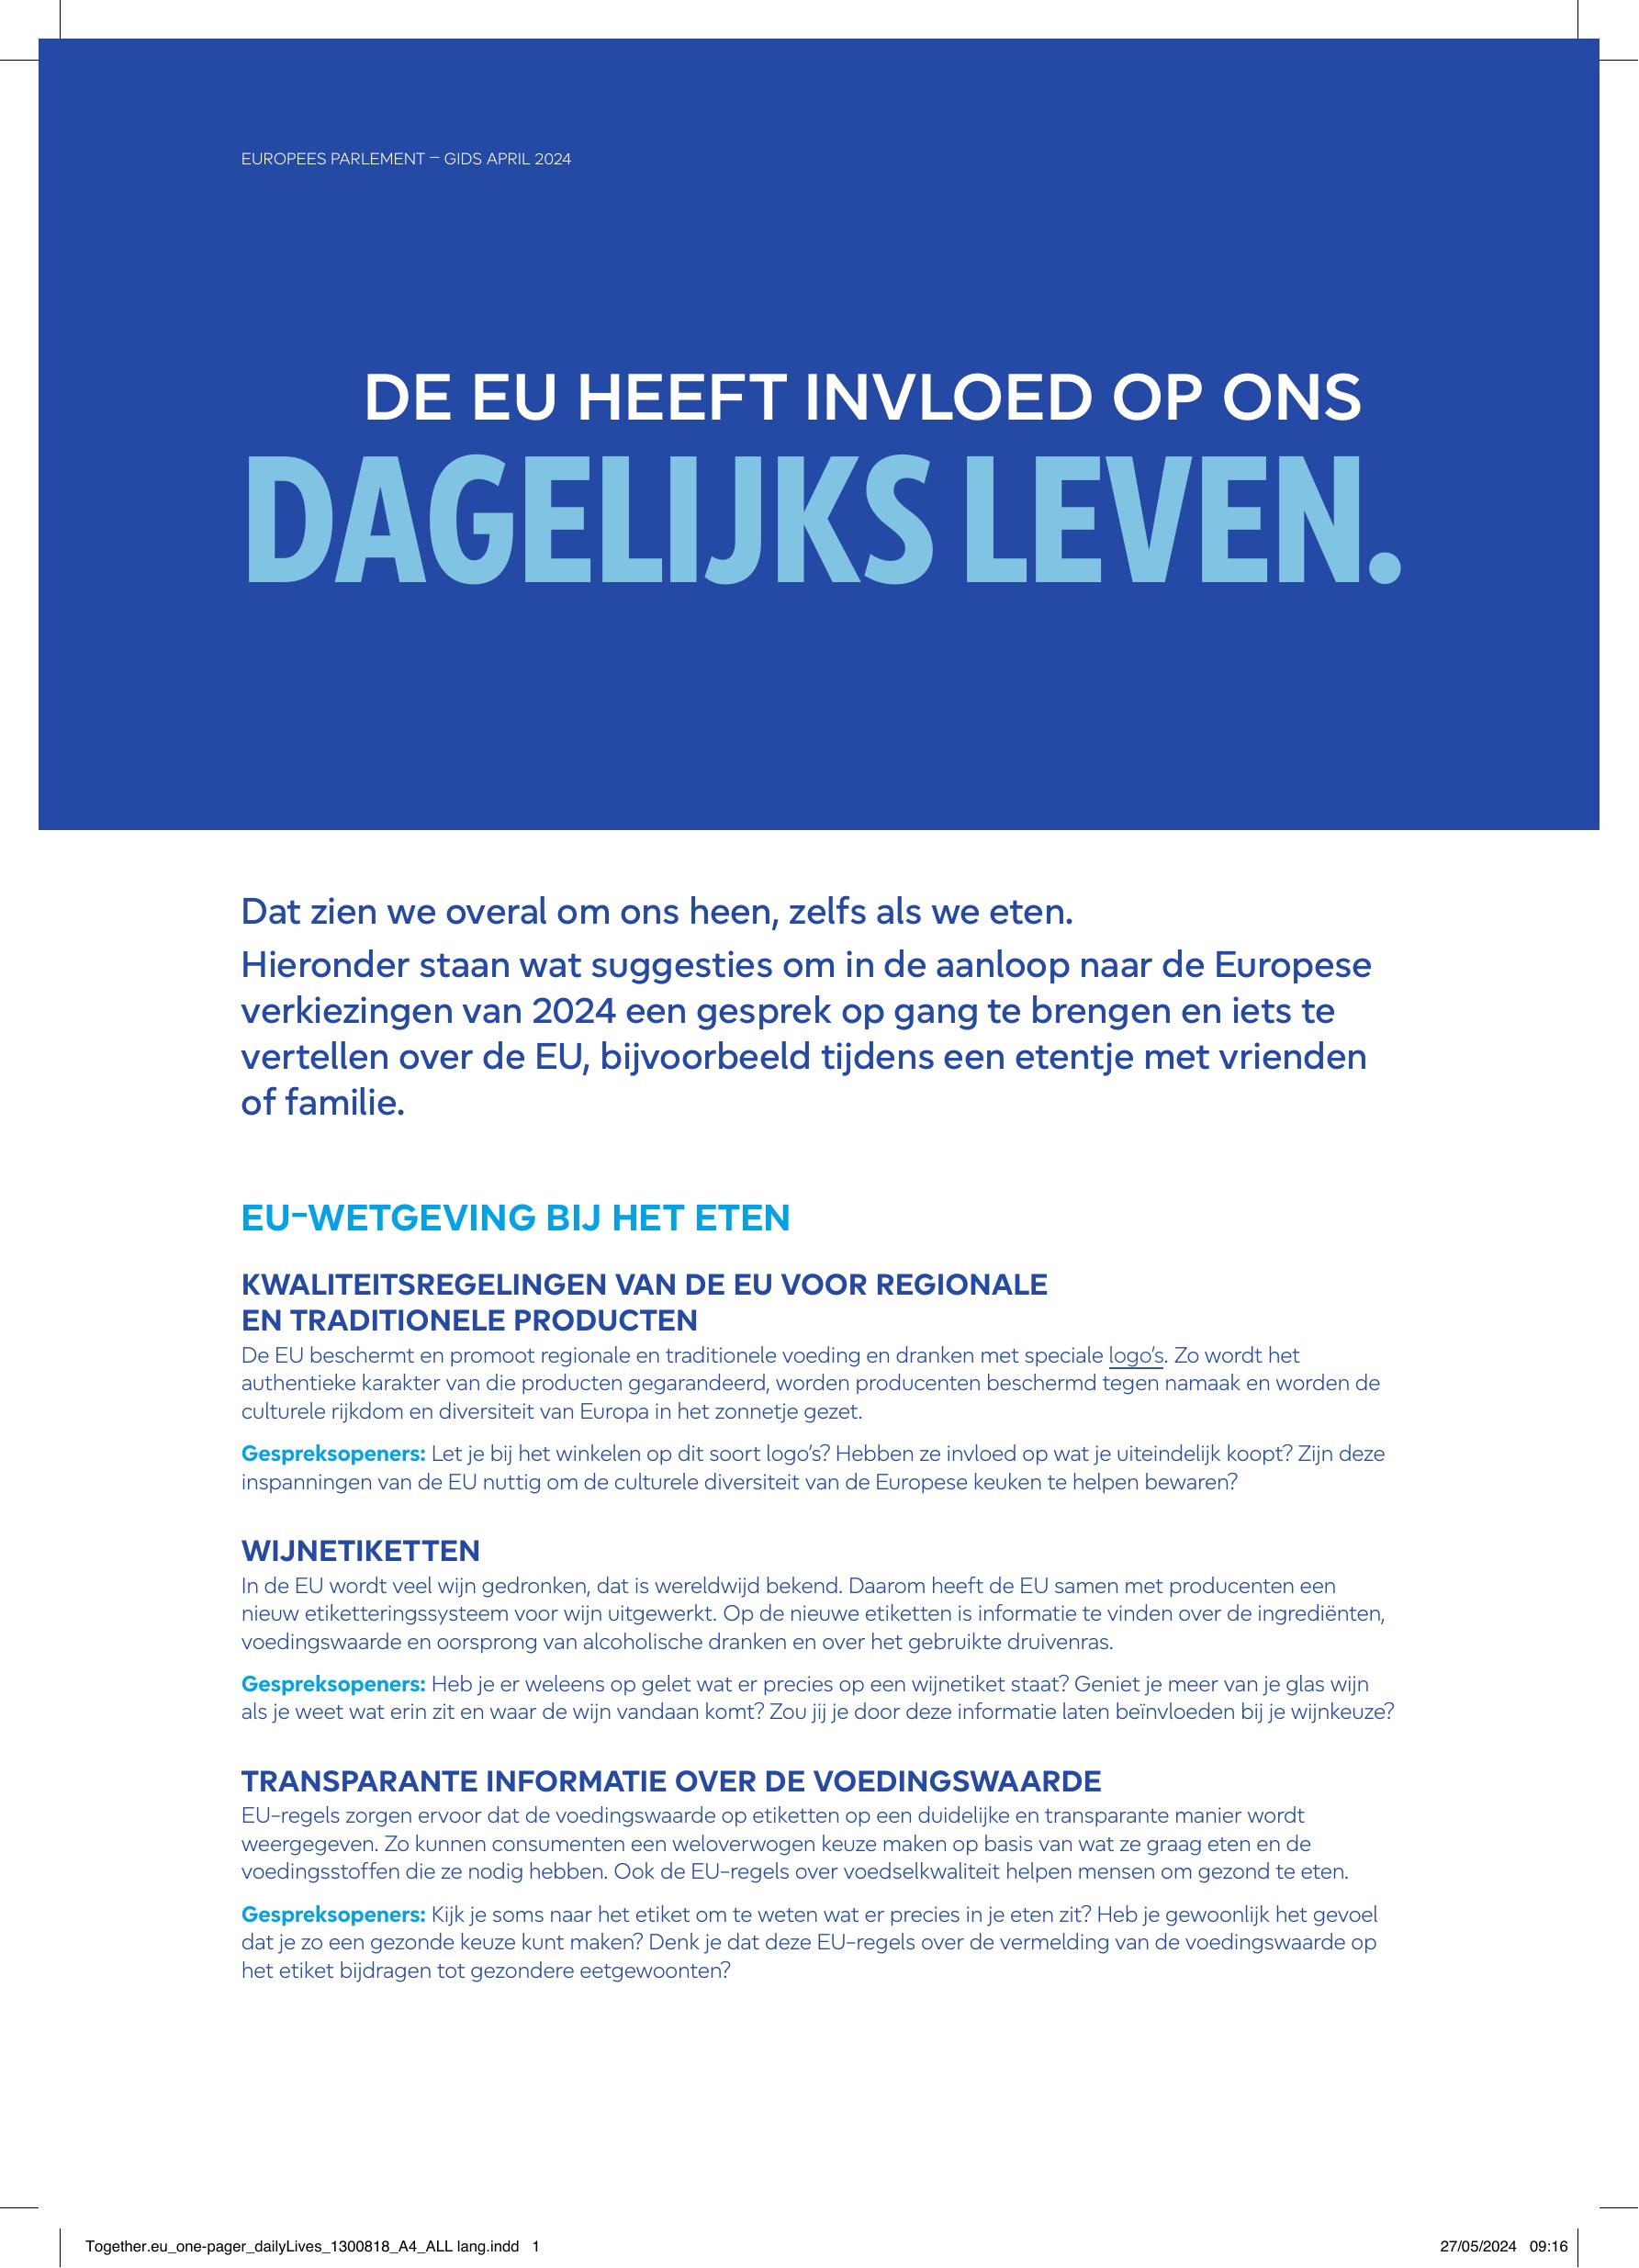 Together.eu_one-pager_dailyLives_print.pdf